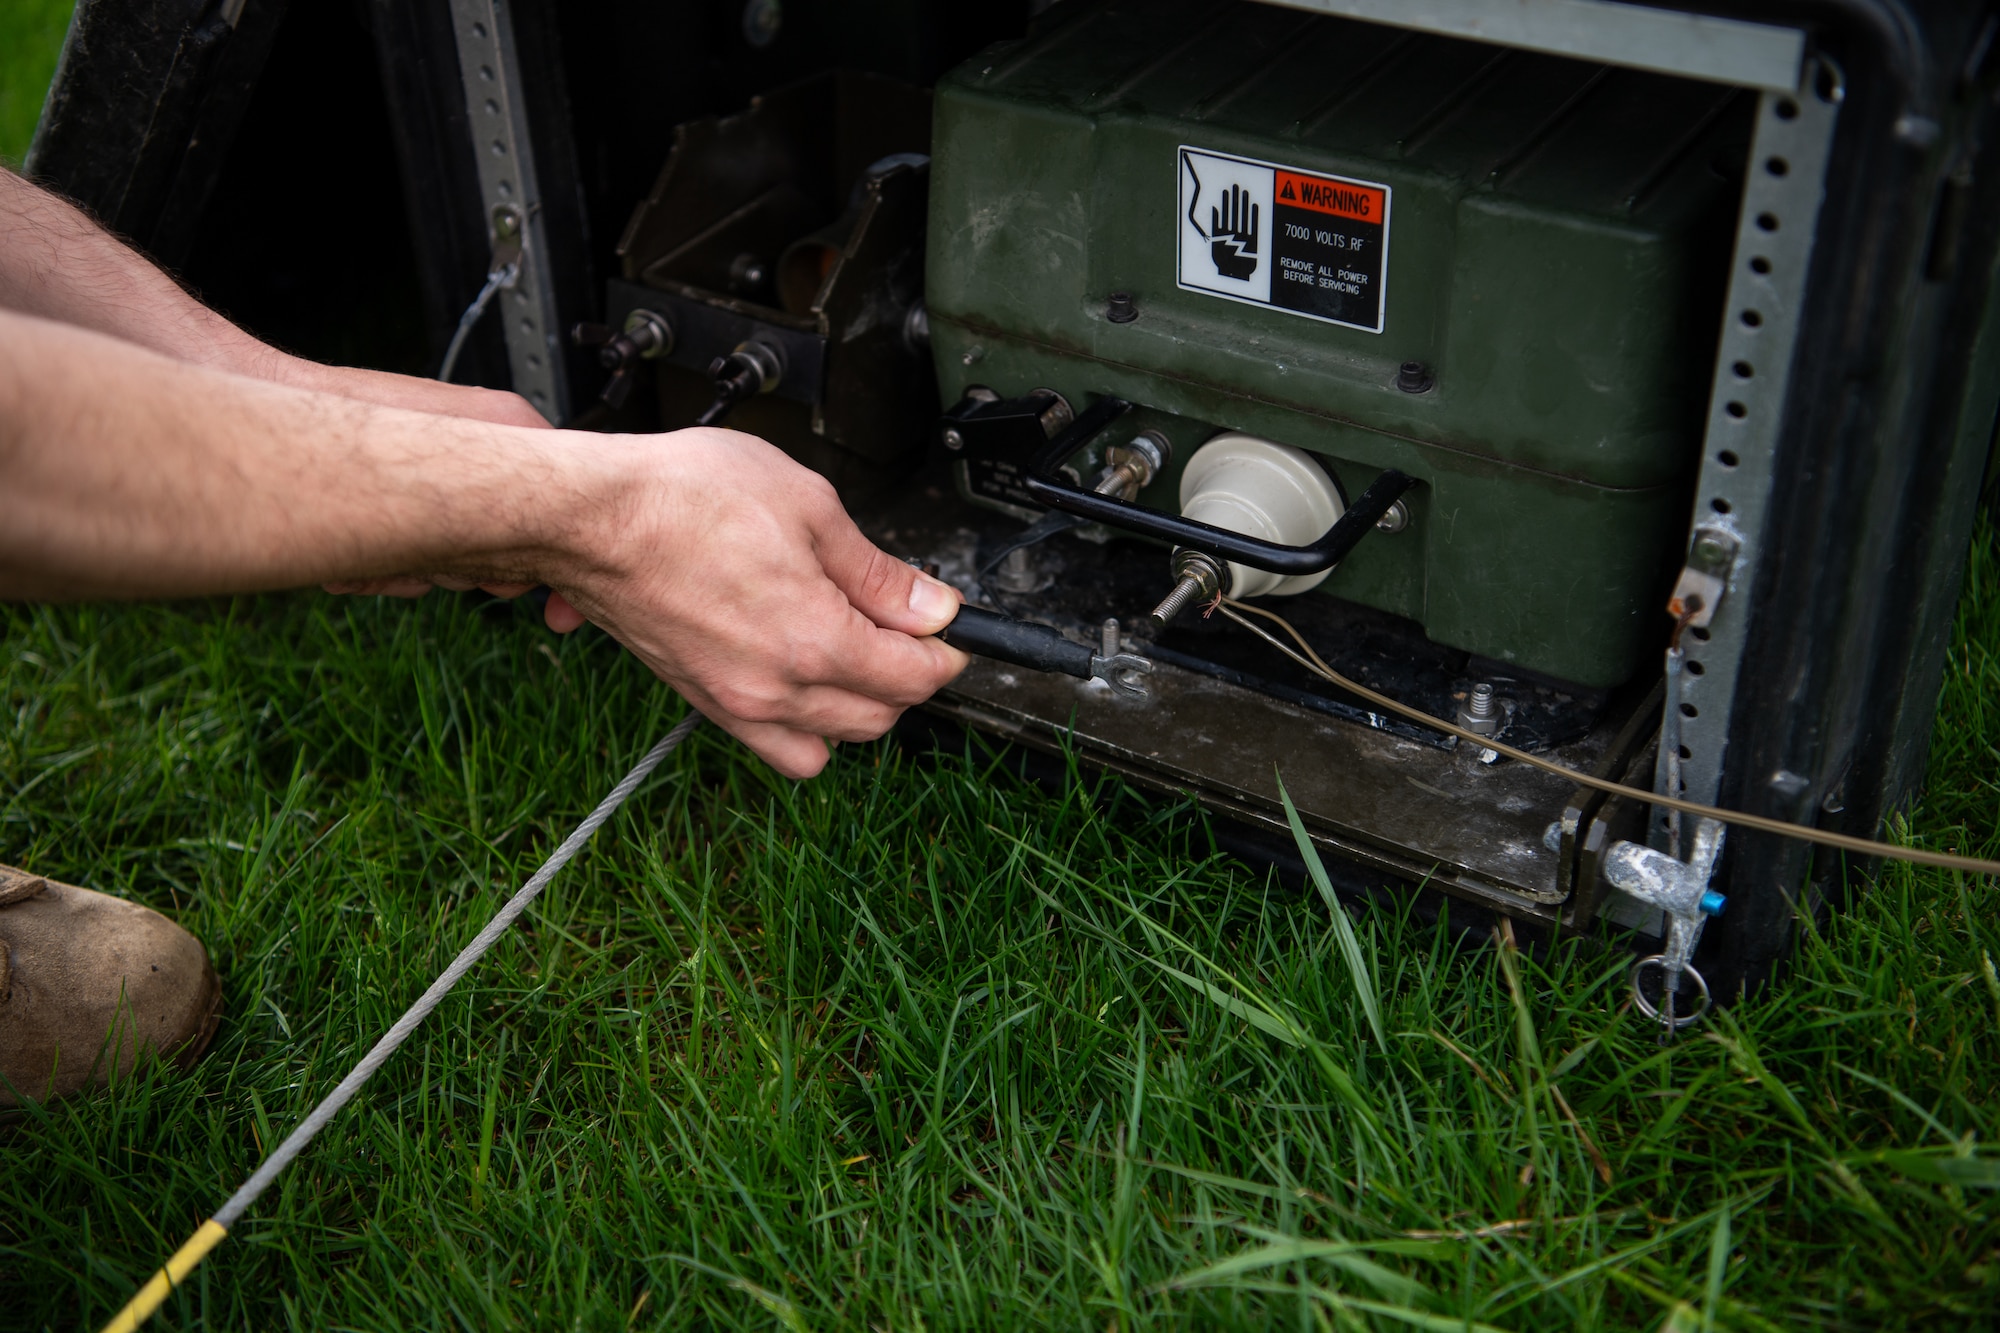 A hand holding a cable, appearing to insert it into a device. In the foreground, grass.